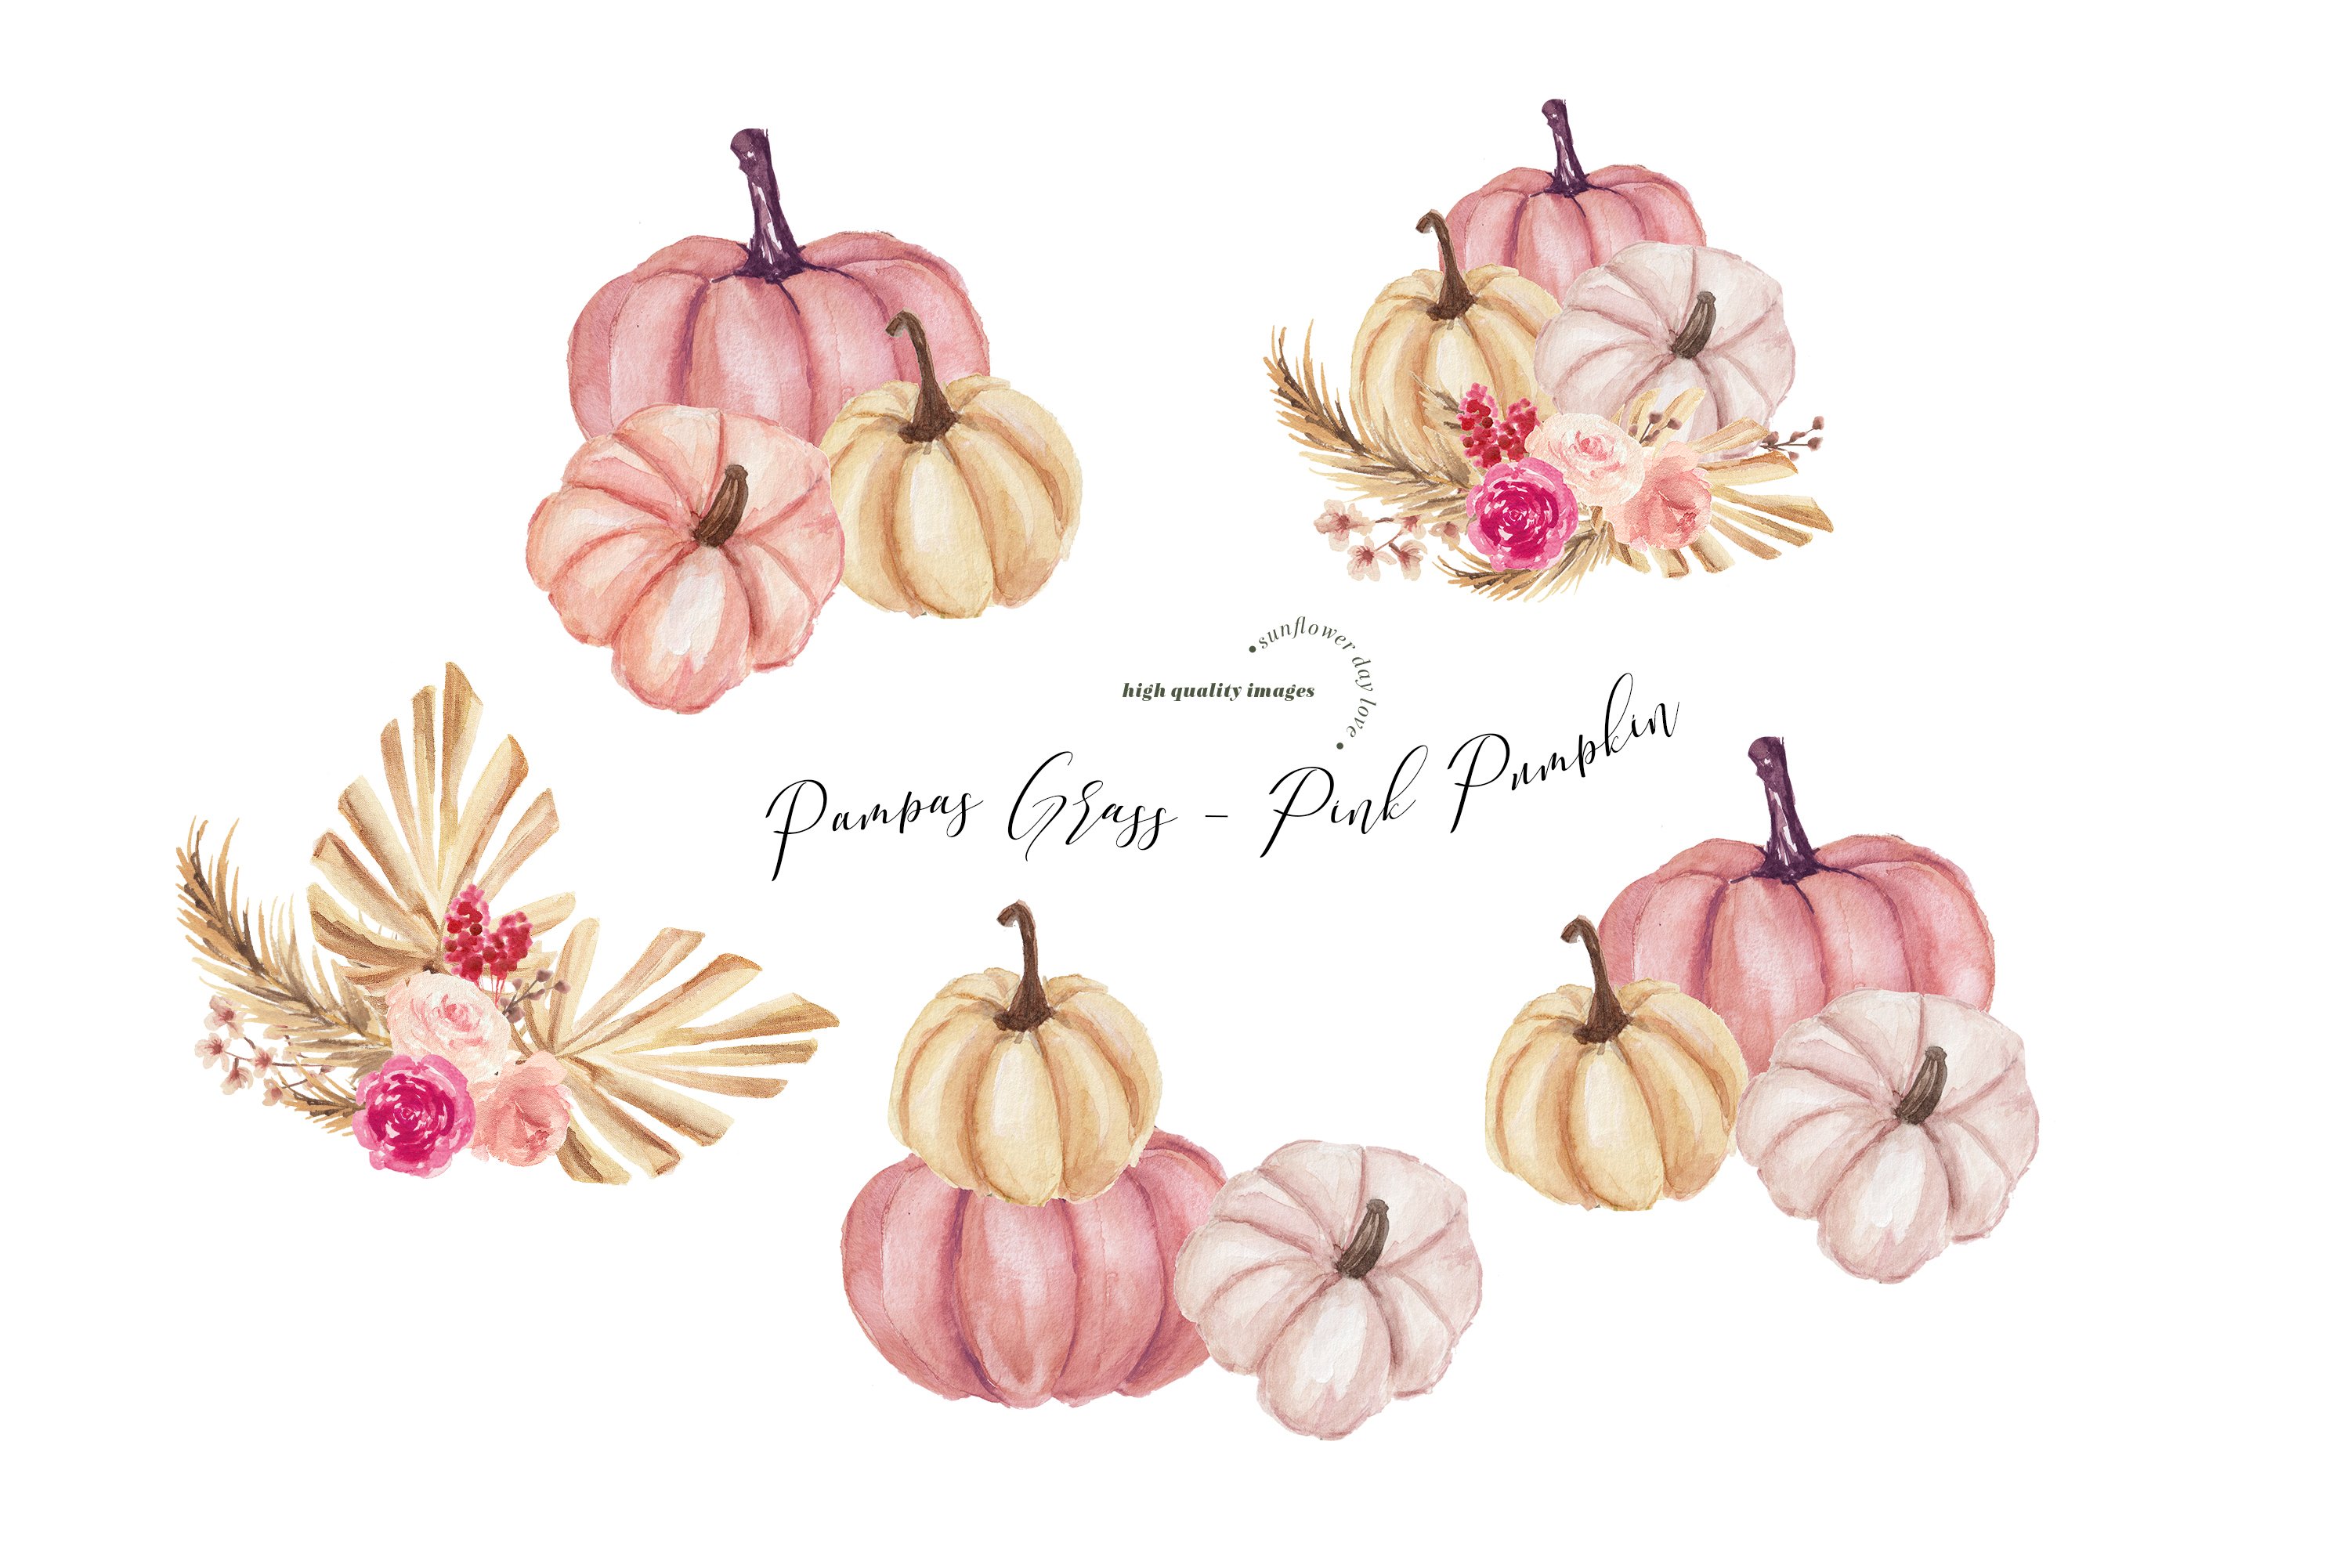 Cool pastel pumpkins with flowers.